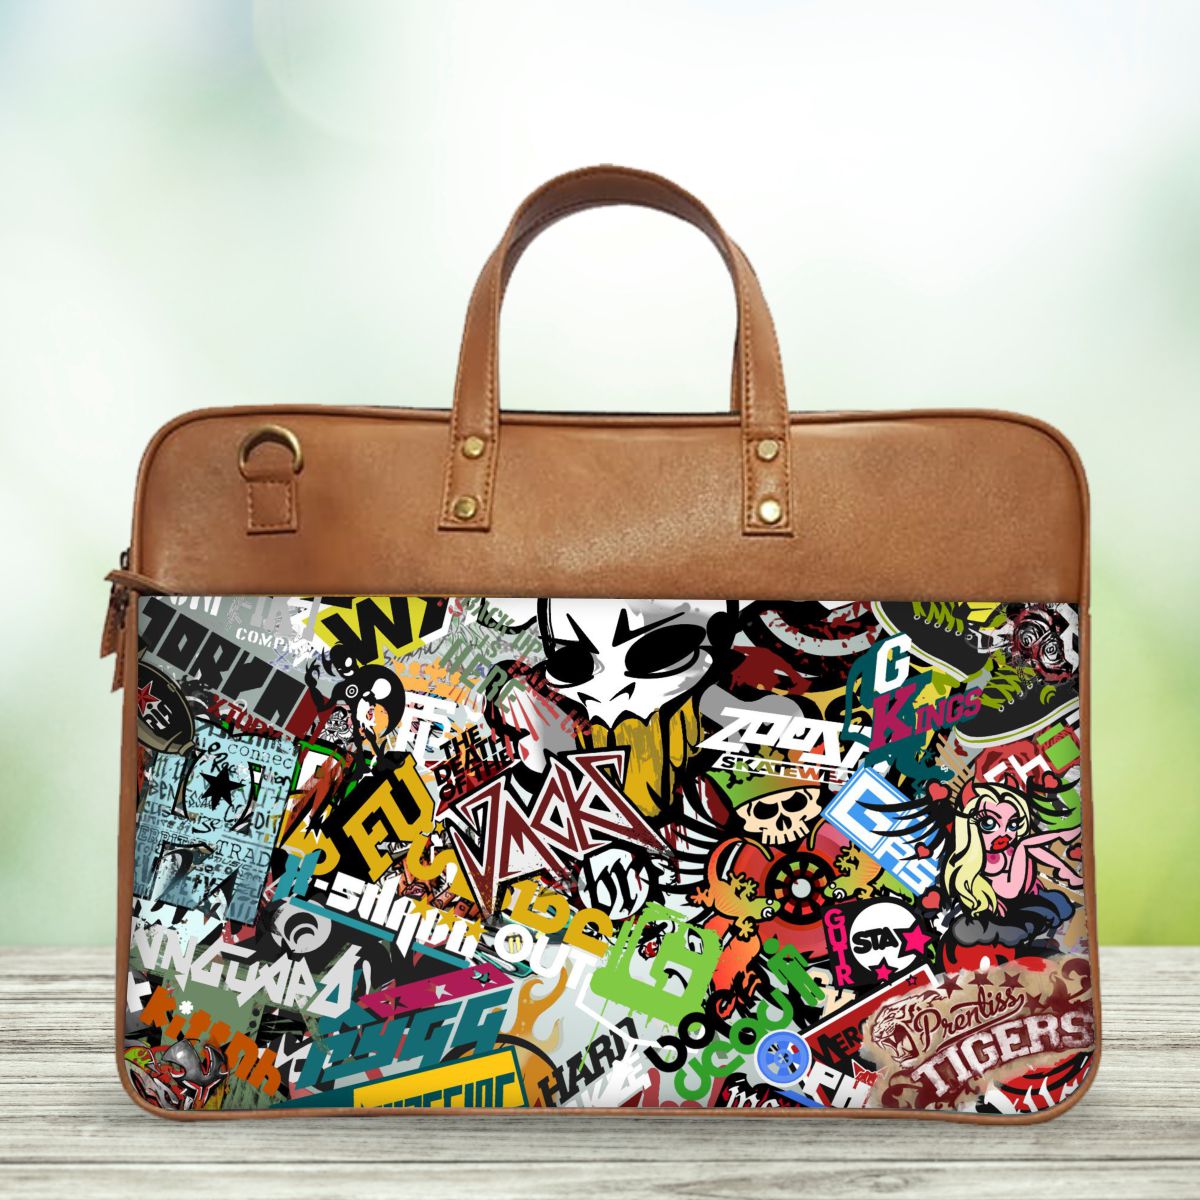 Laptop Bags & Laptop Sleeves for your laptops